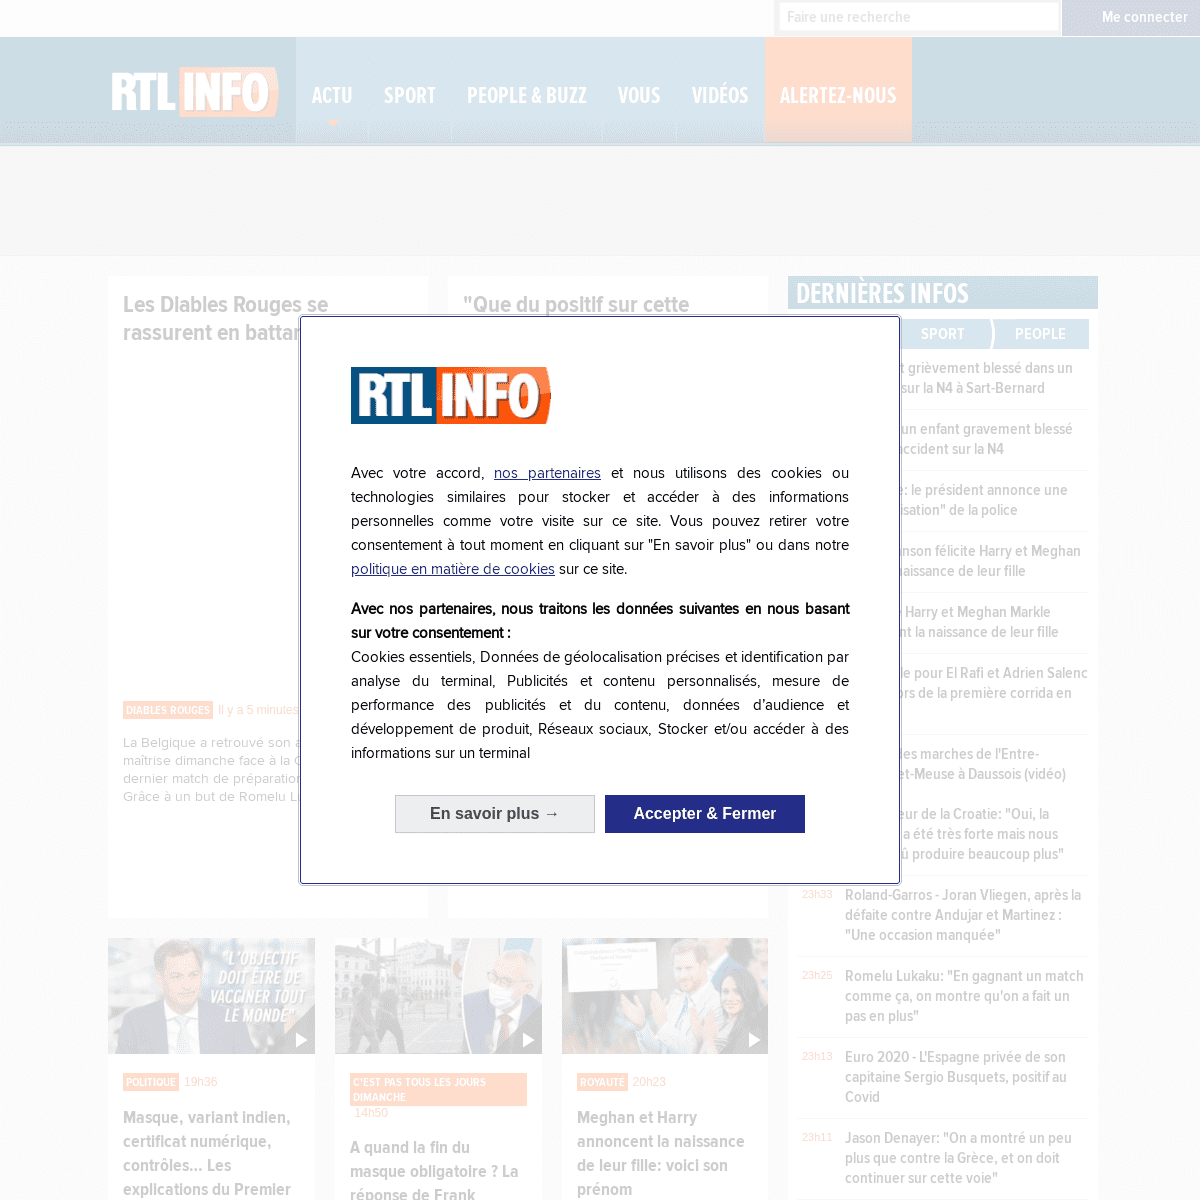 A complete backup of https://rtl.be